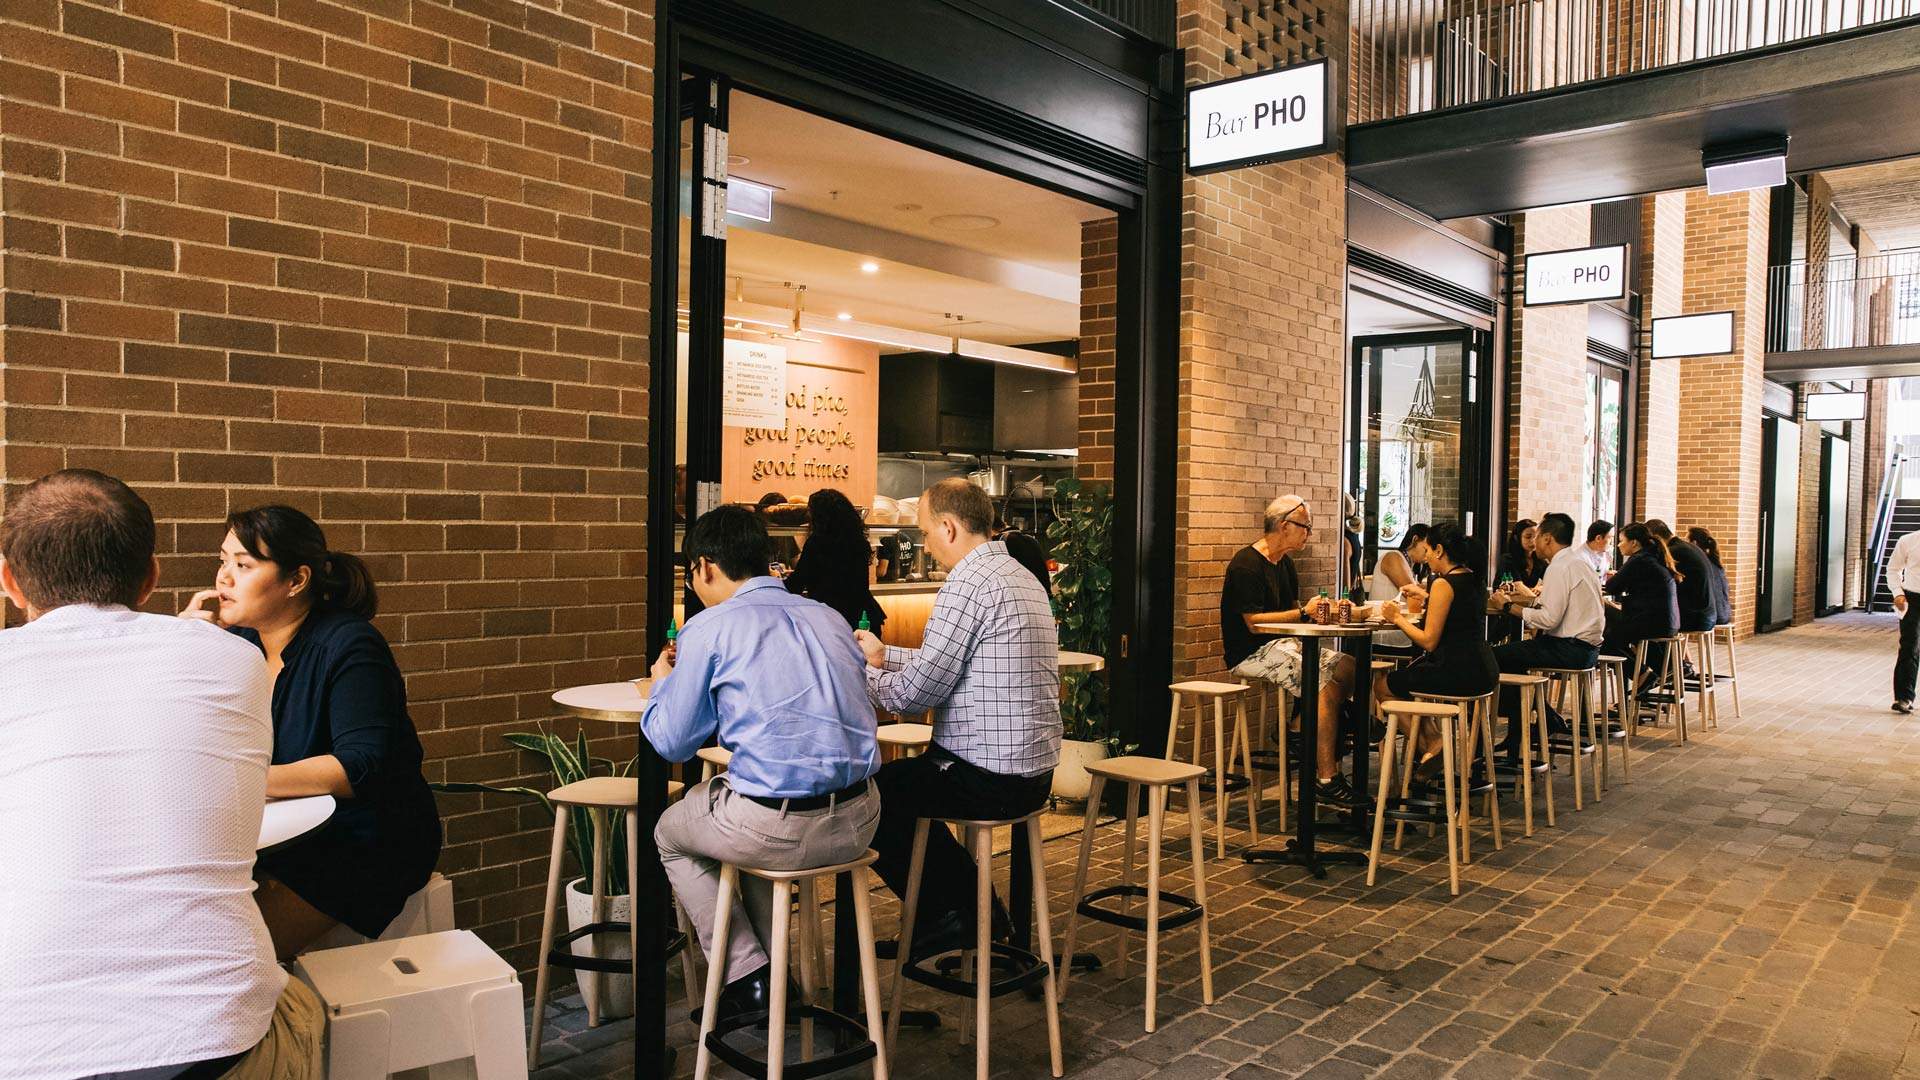 Barrack Place Is the CBD's New Coffee-Filled Laneway Precinct